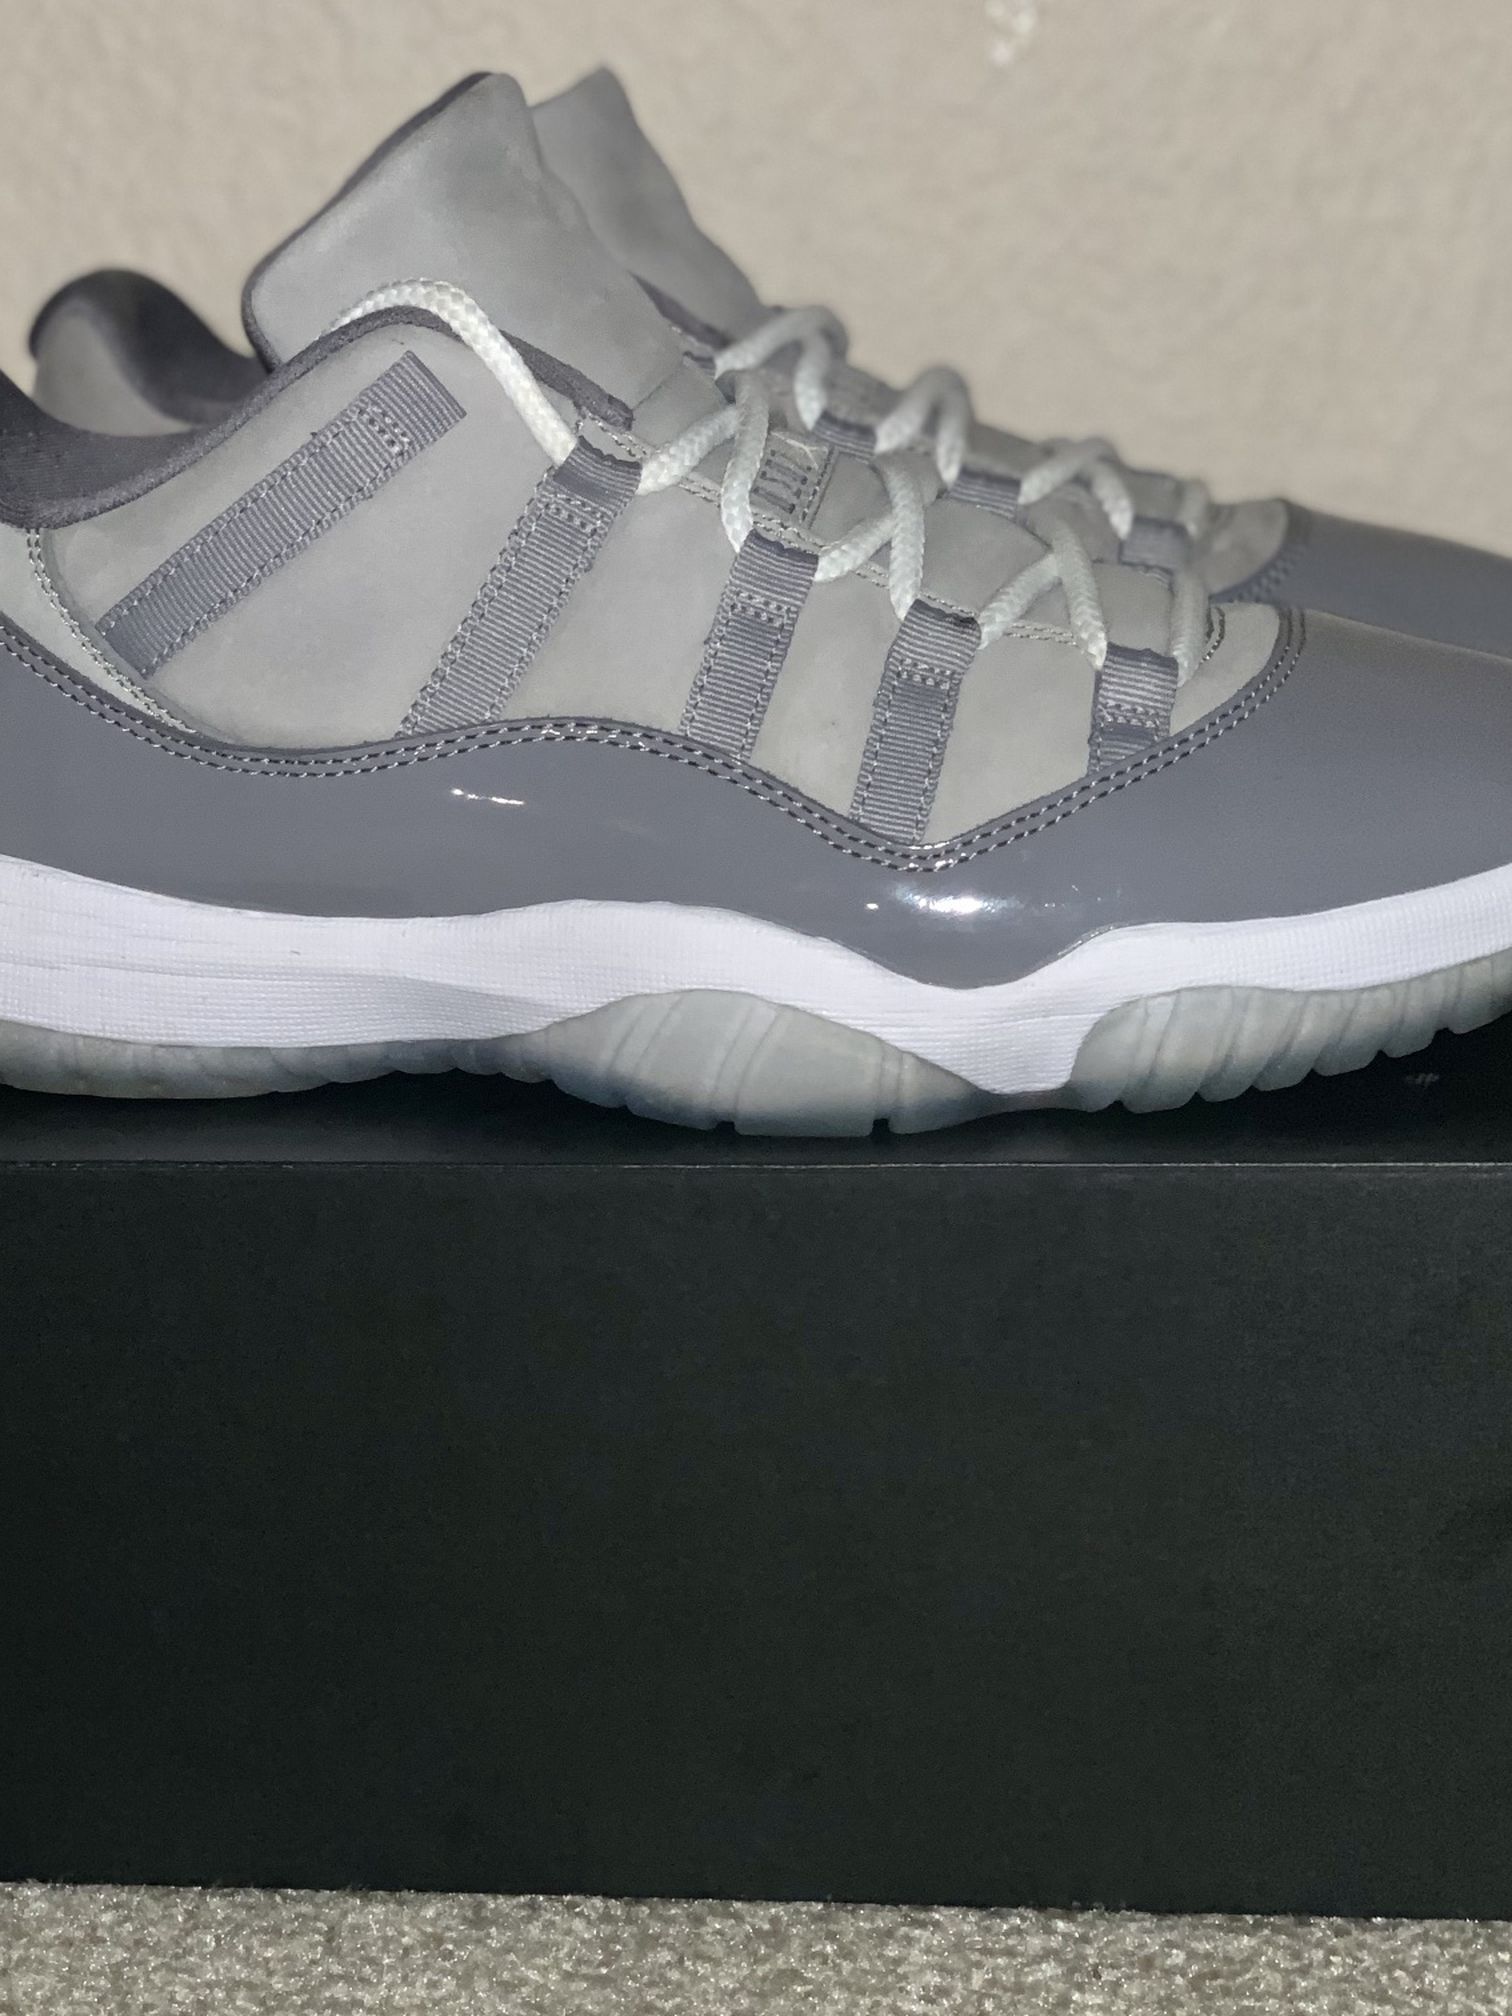 Cool Gray 11 Low’s⚪️✨ Size 10.5 Men’s